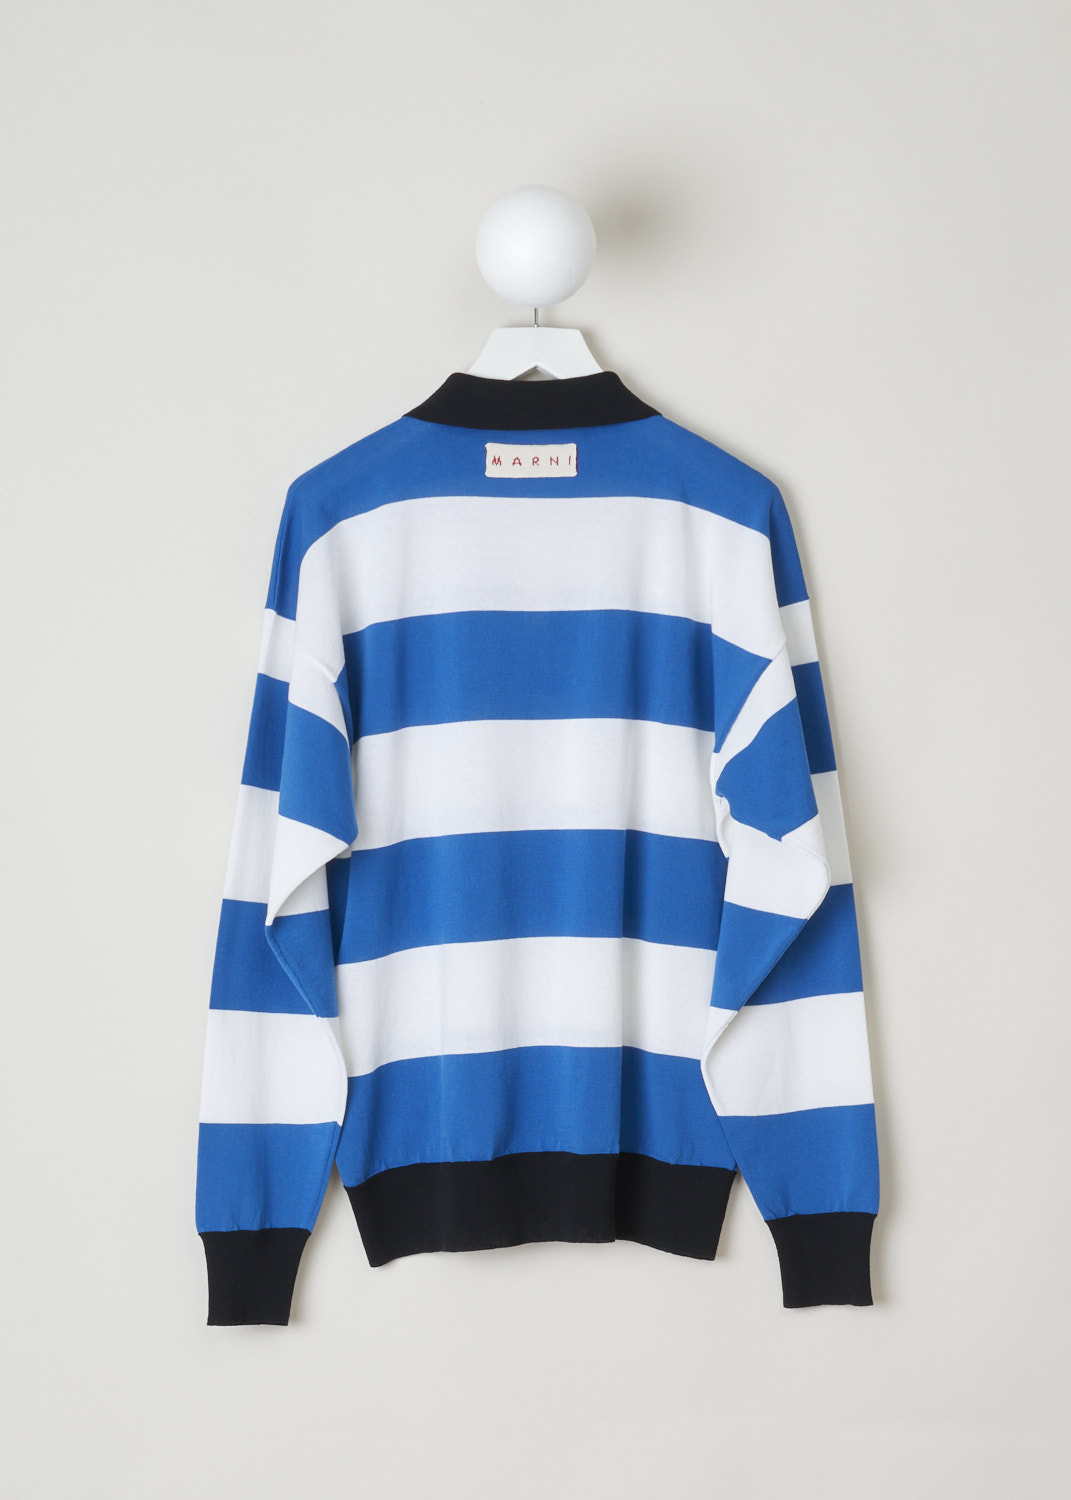 Marni, Horizontally striped long sleeve polo, POMD0029Q0_UFC912_MSB54, blue white, print, back, This long sleeve polo is designed with an oversized fit in mind and comes adorned with lovely horizontal stripes in blue and white. The pointed collar, hem and the cuffs are all coloured to a darker shade of blue.  